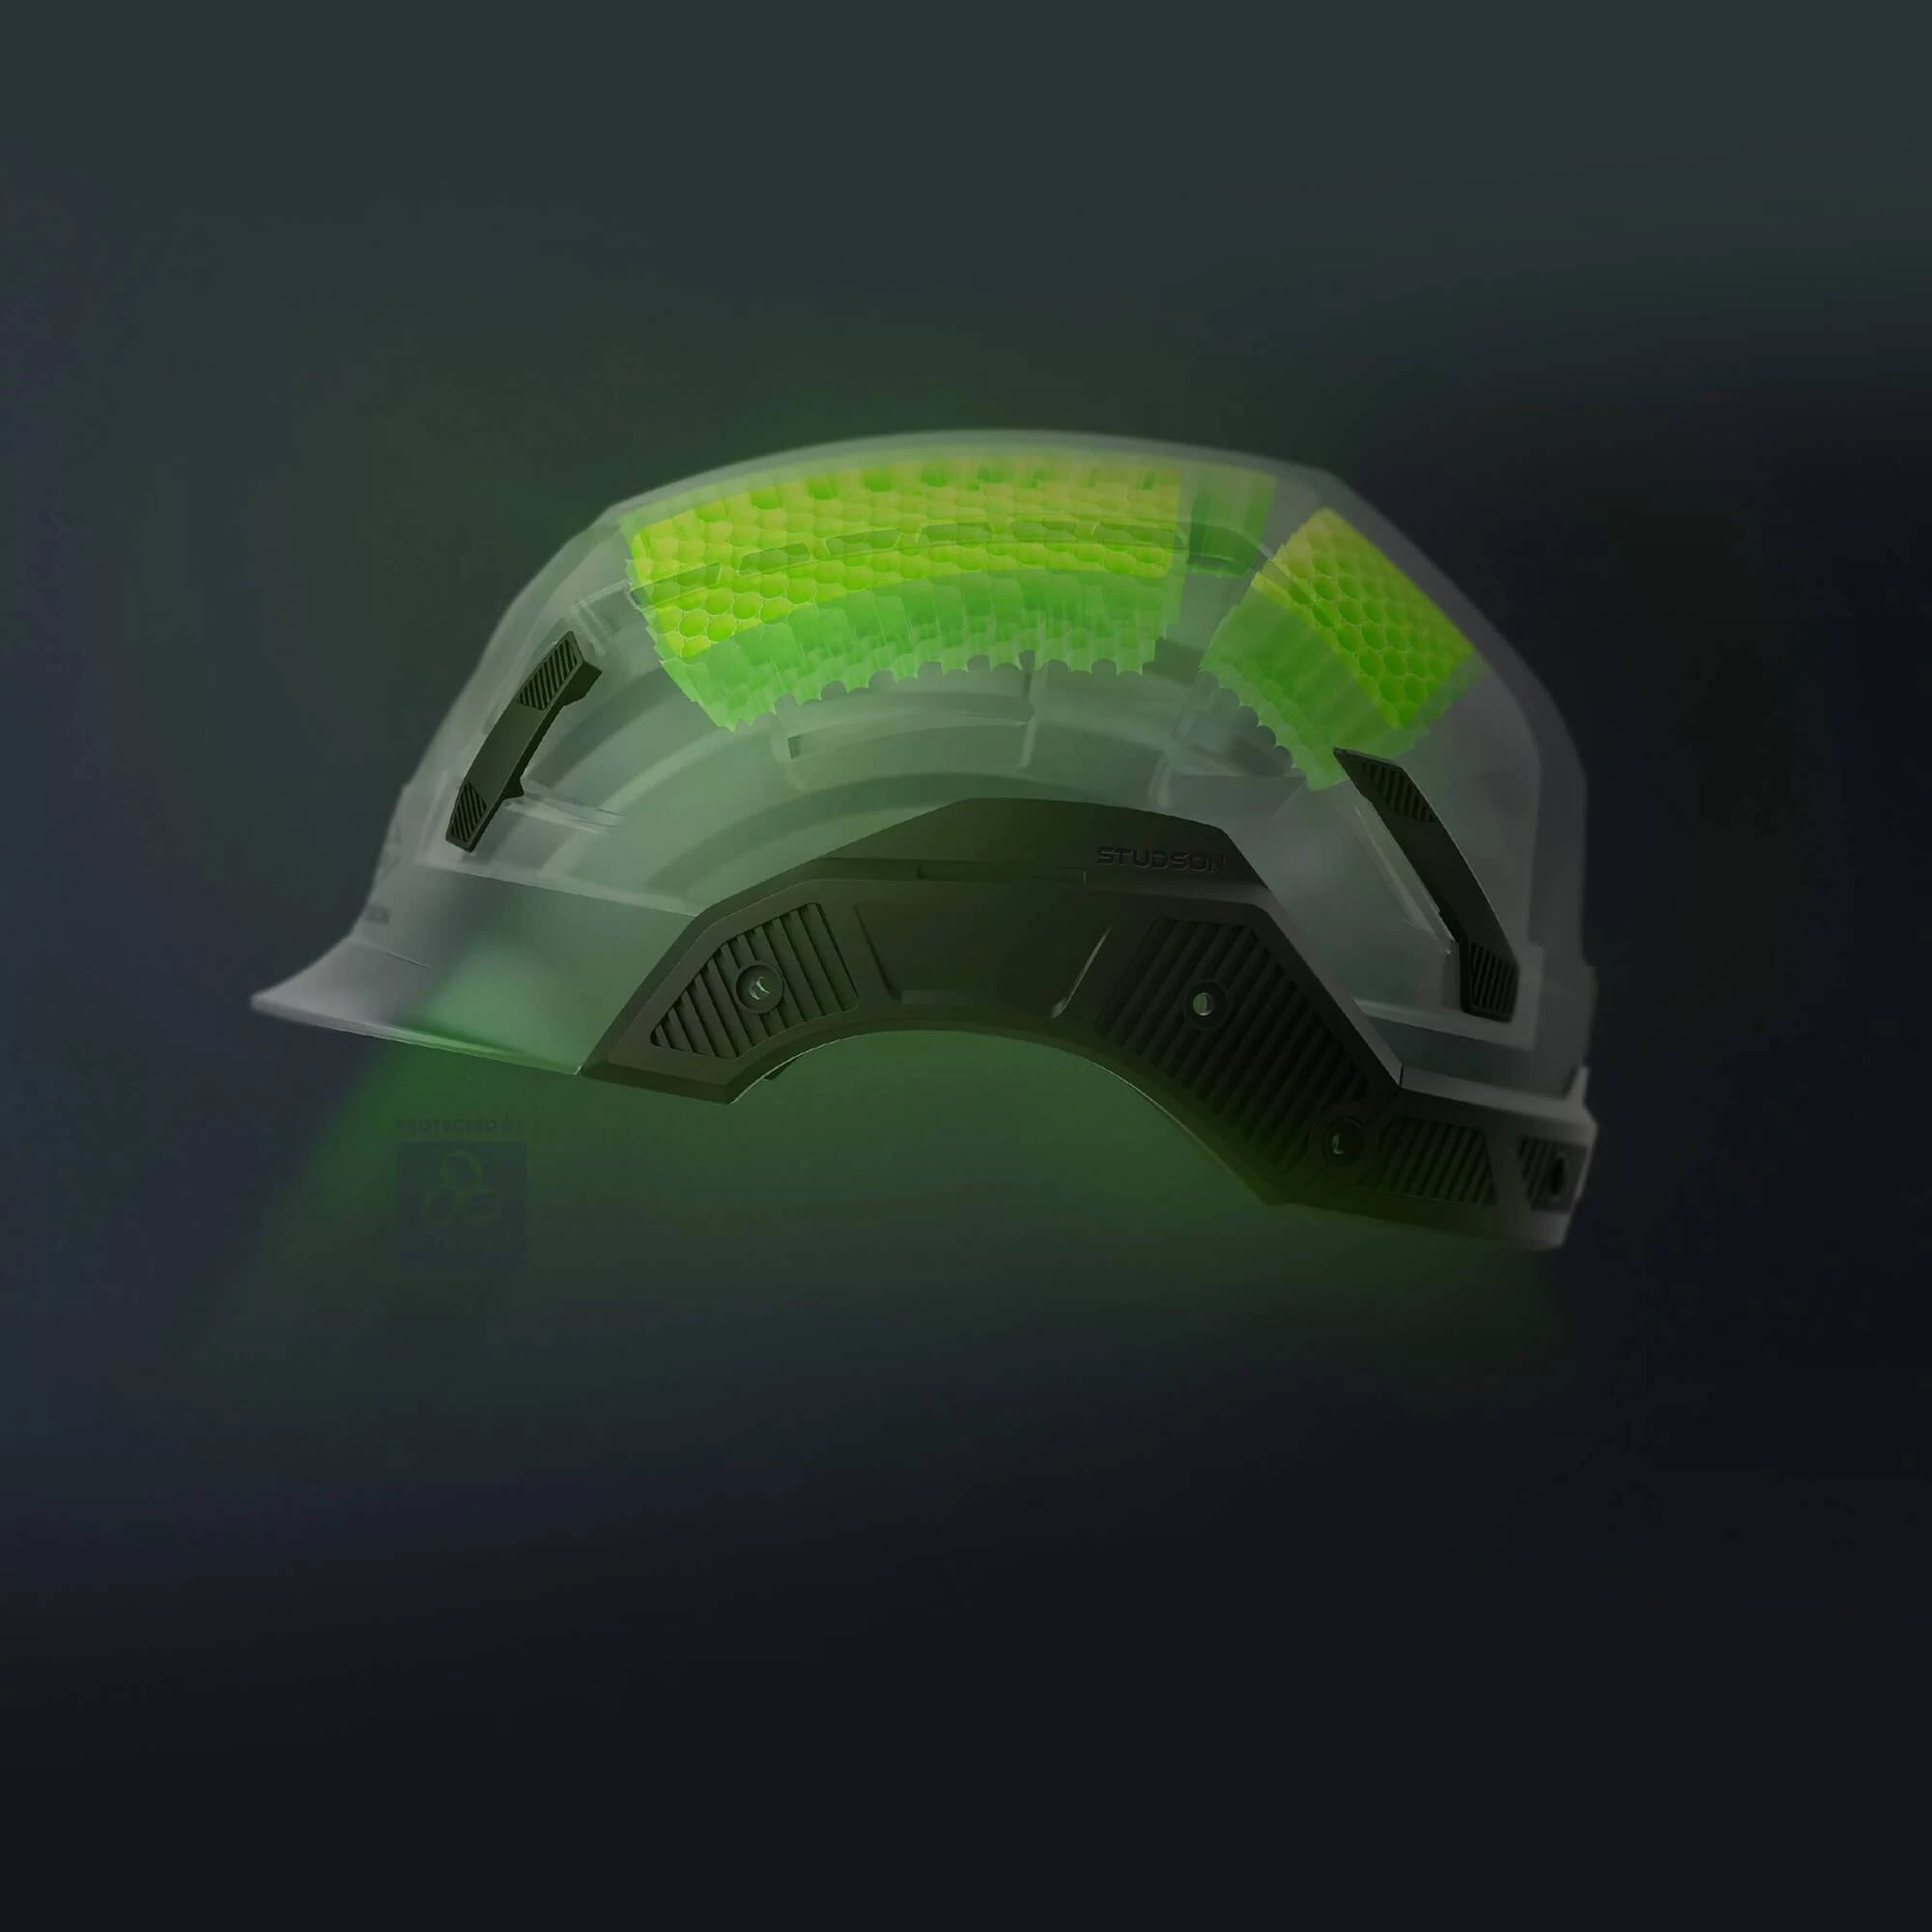 Studson SHK-1 Type 2 Vented Helmet from Columbia Safety